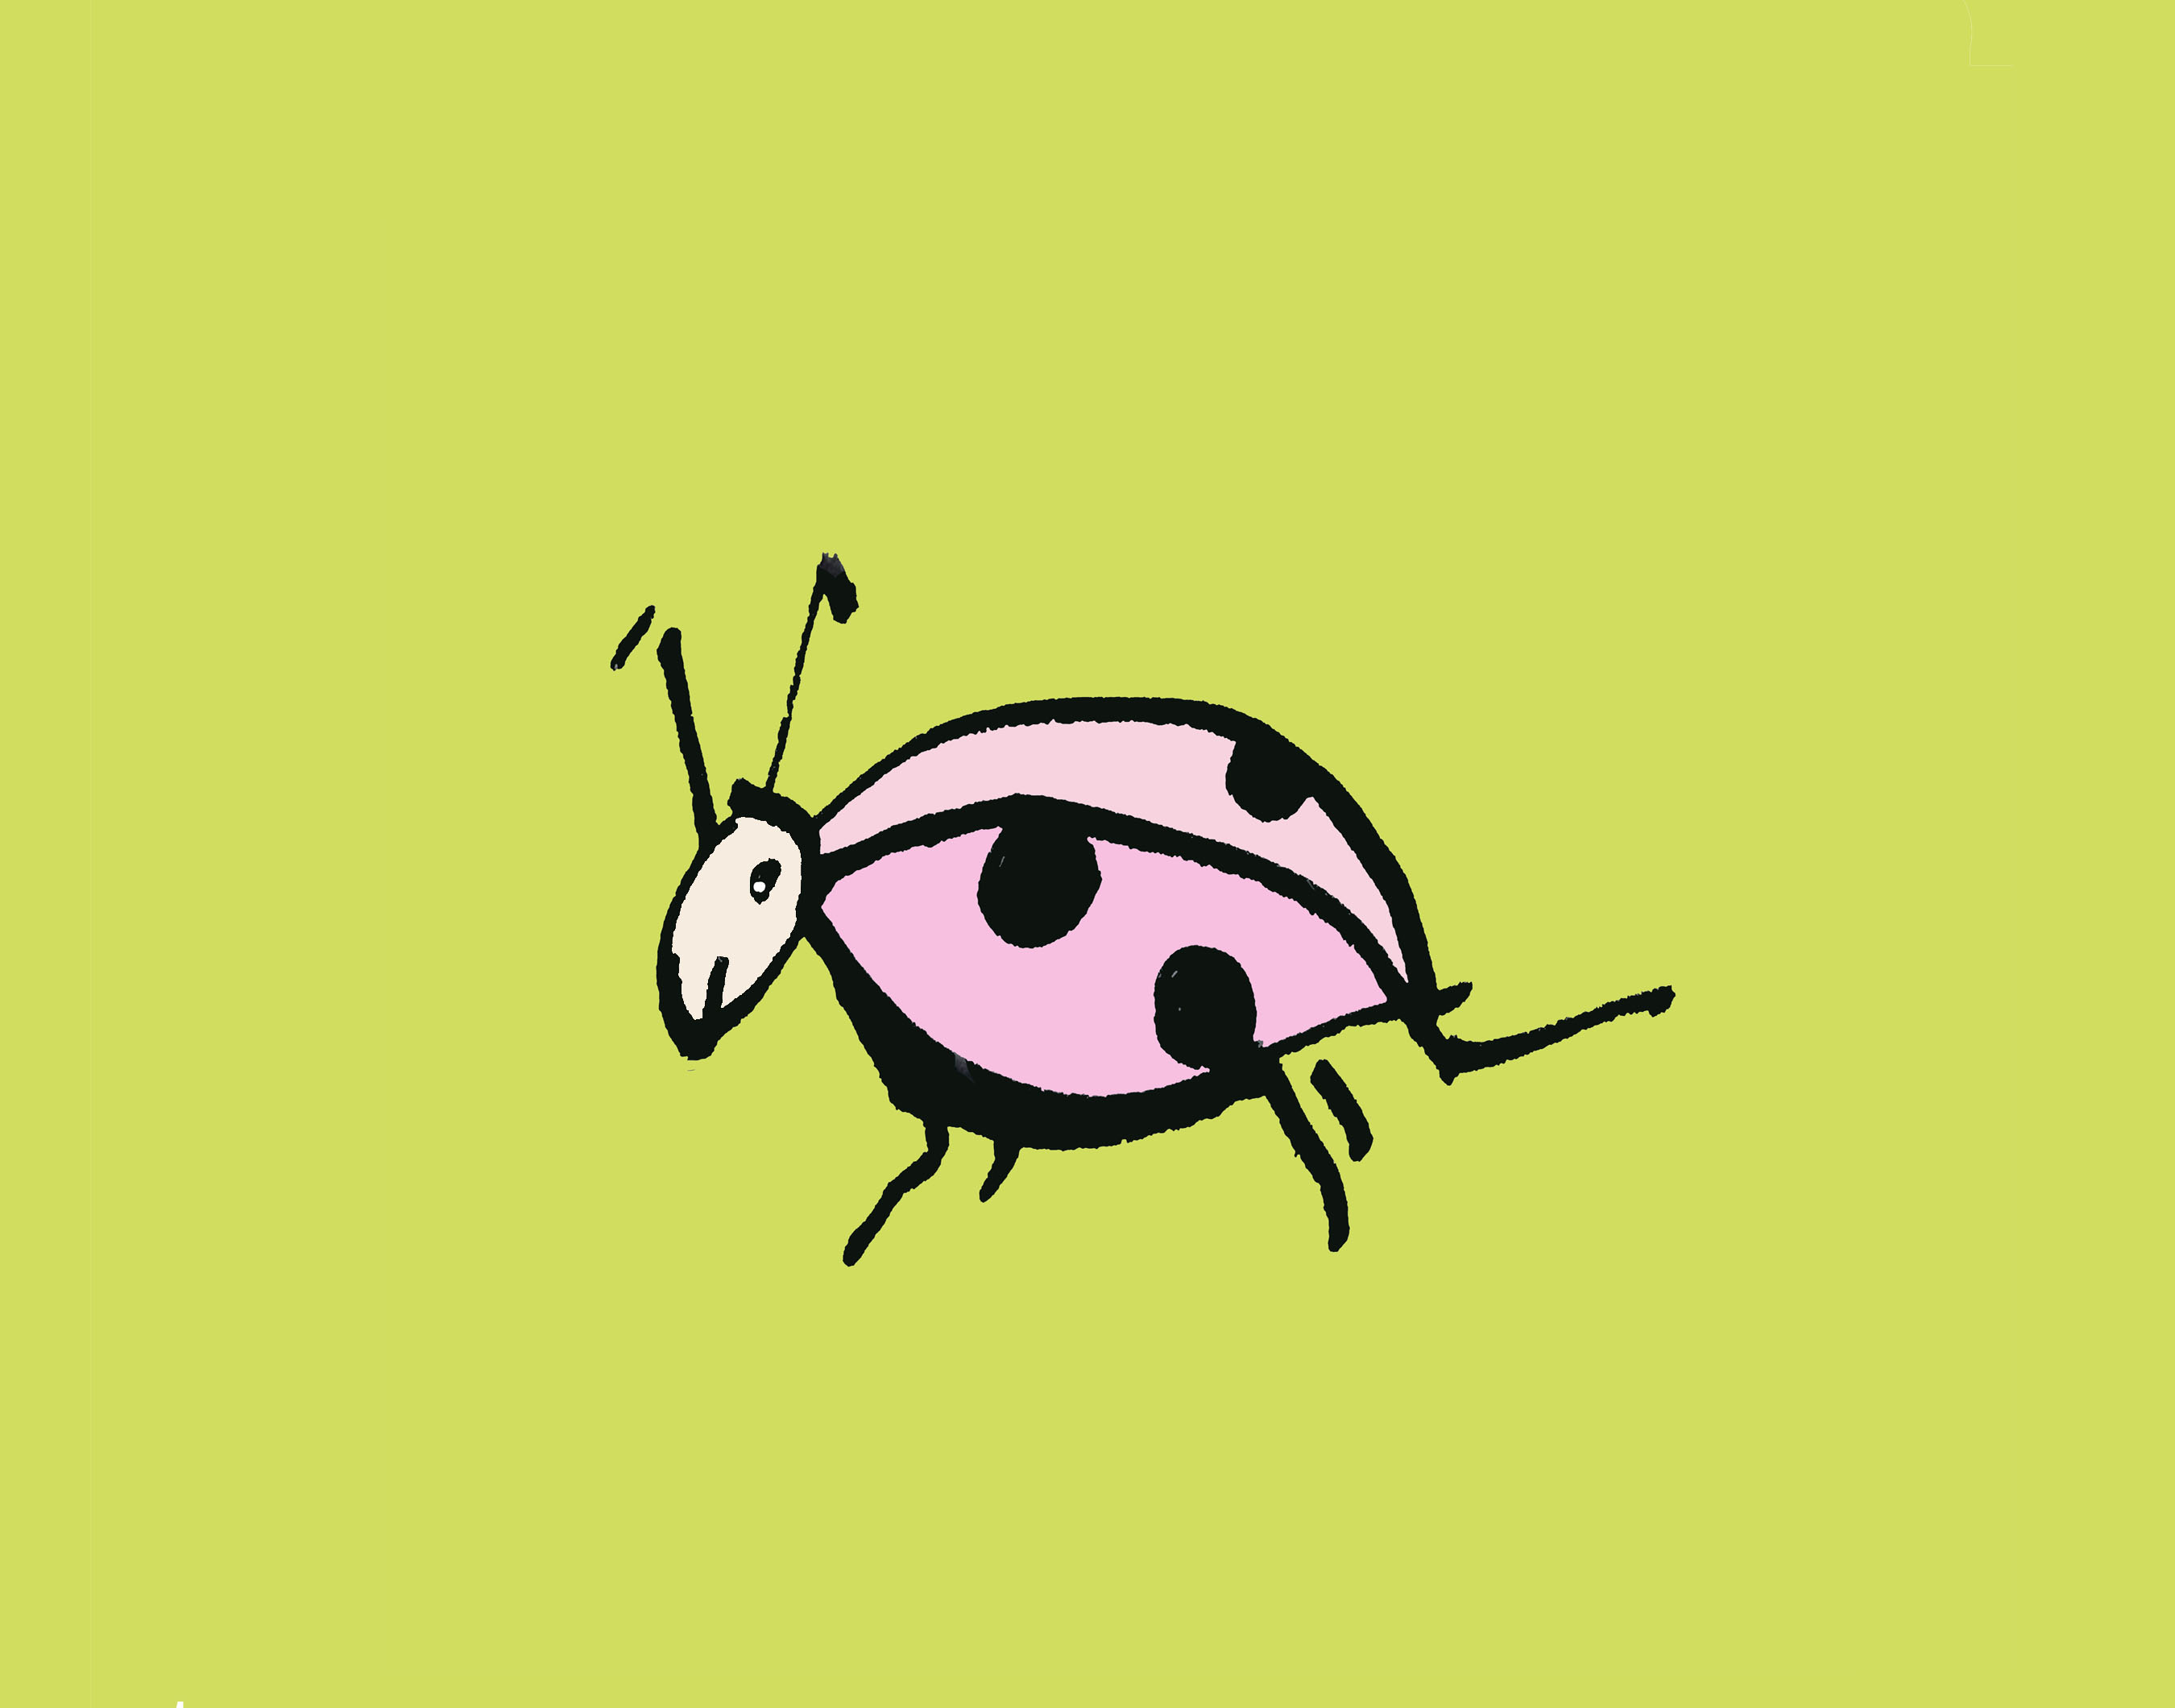 art every day number 490  / illustration / pink lady(bug)